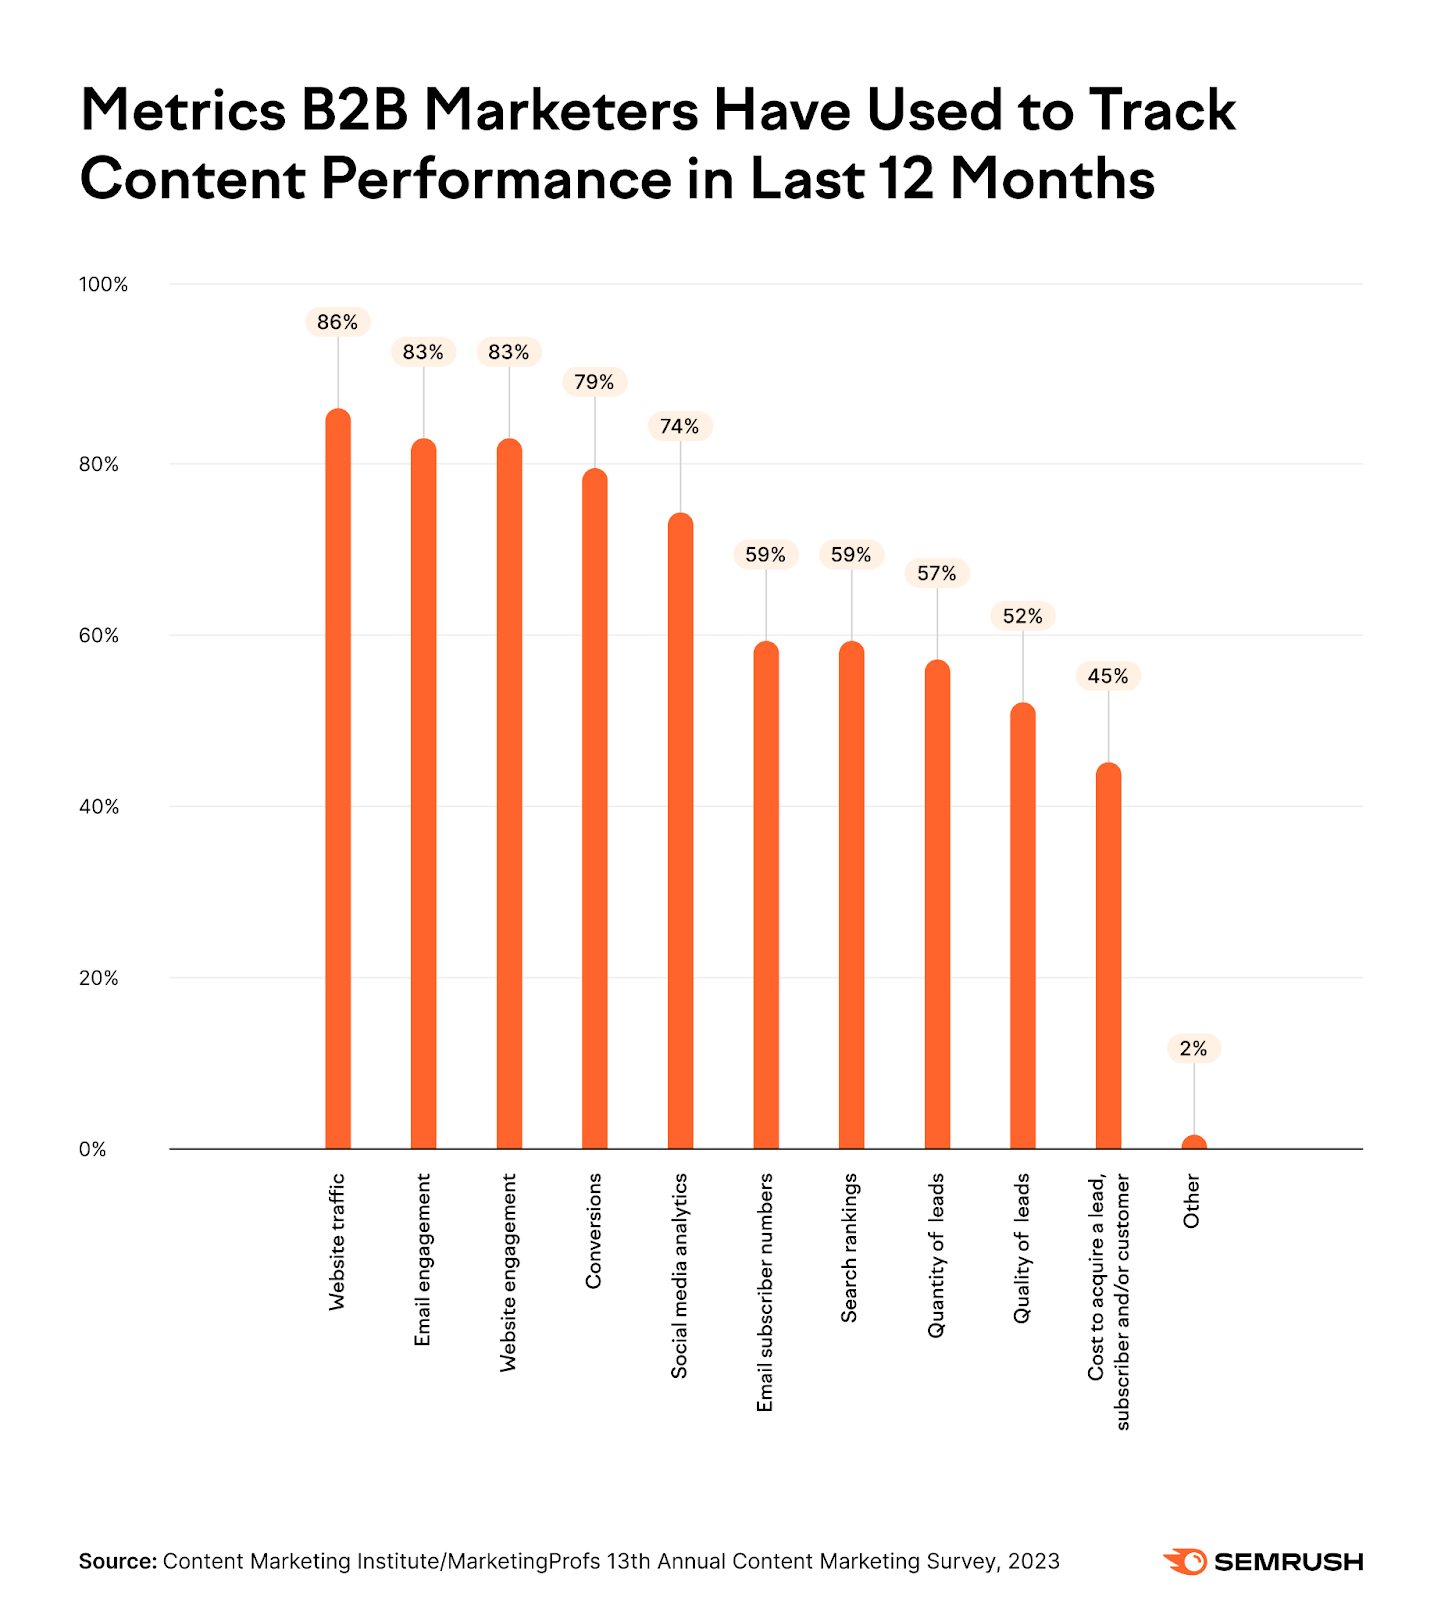 an image showing "metrics B2B marketers have used to track content performance in the last 12 months"